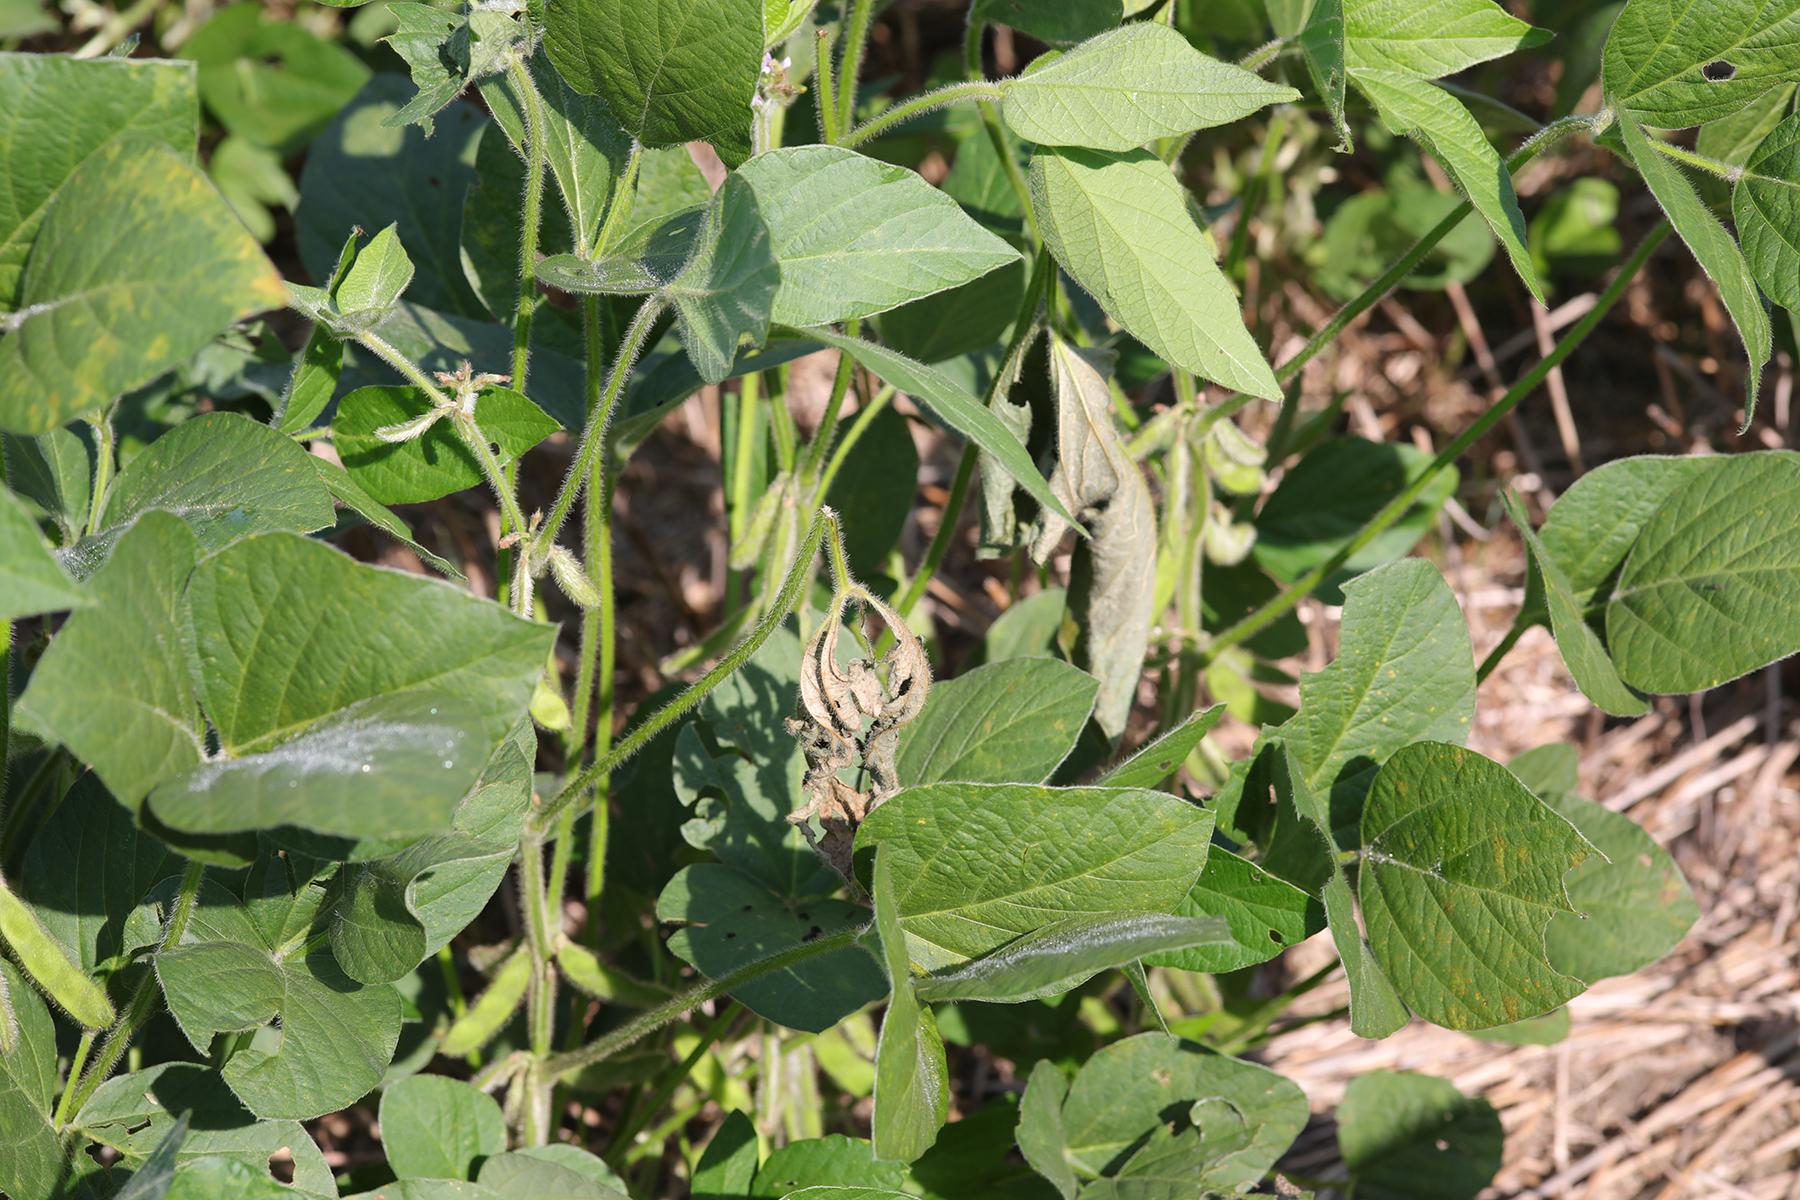 Figure 6. Soybean plant with wilted leaf, which typically happens after Dectes stem borer larvae consume pith from the petiole and begin tunneling into the main stems of the plant. Photo: David Owens